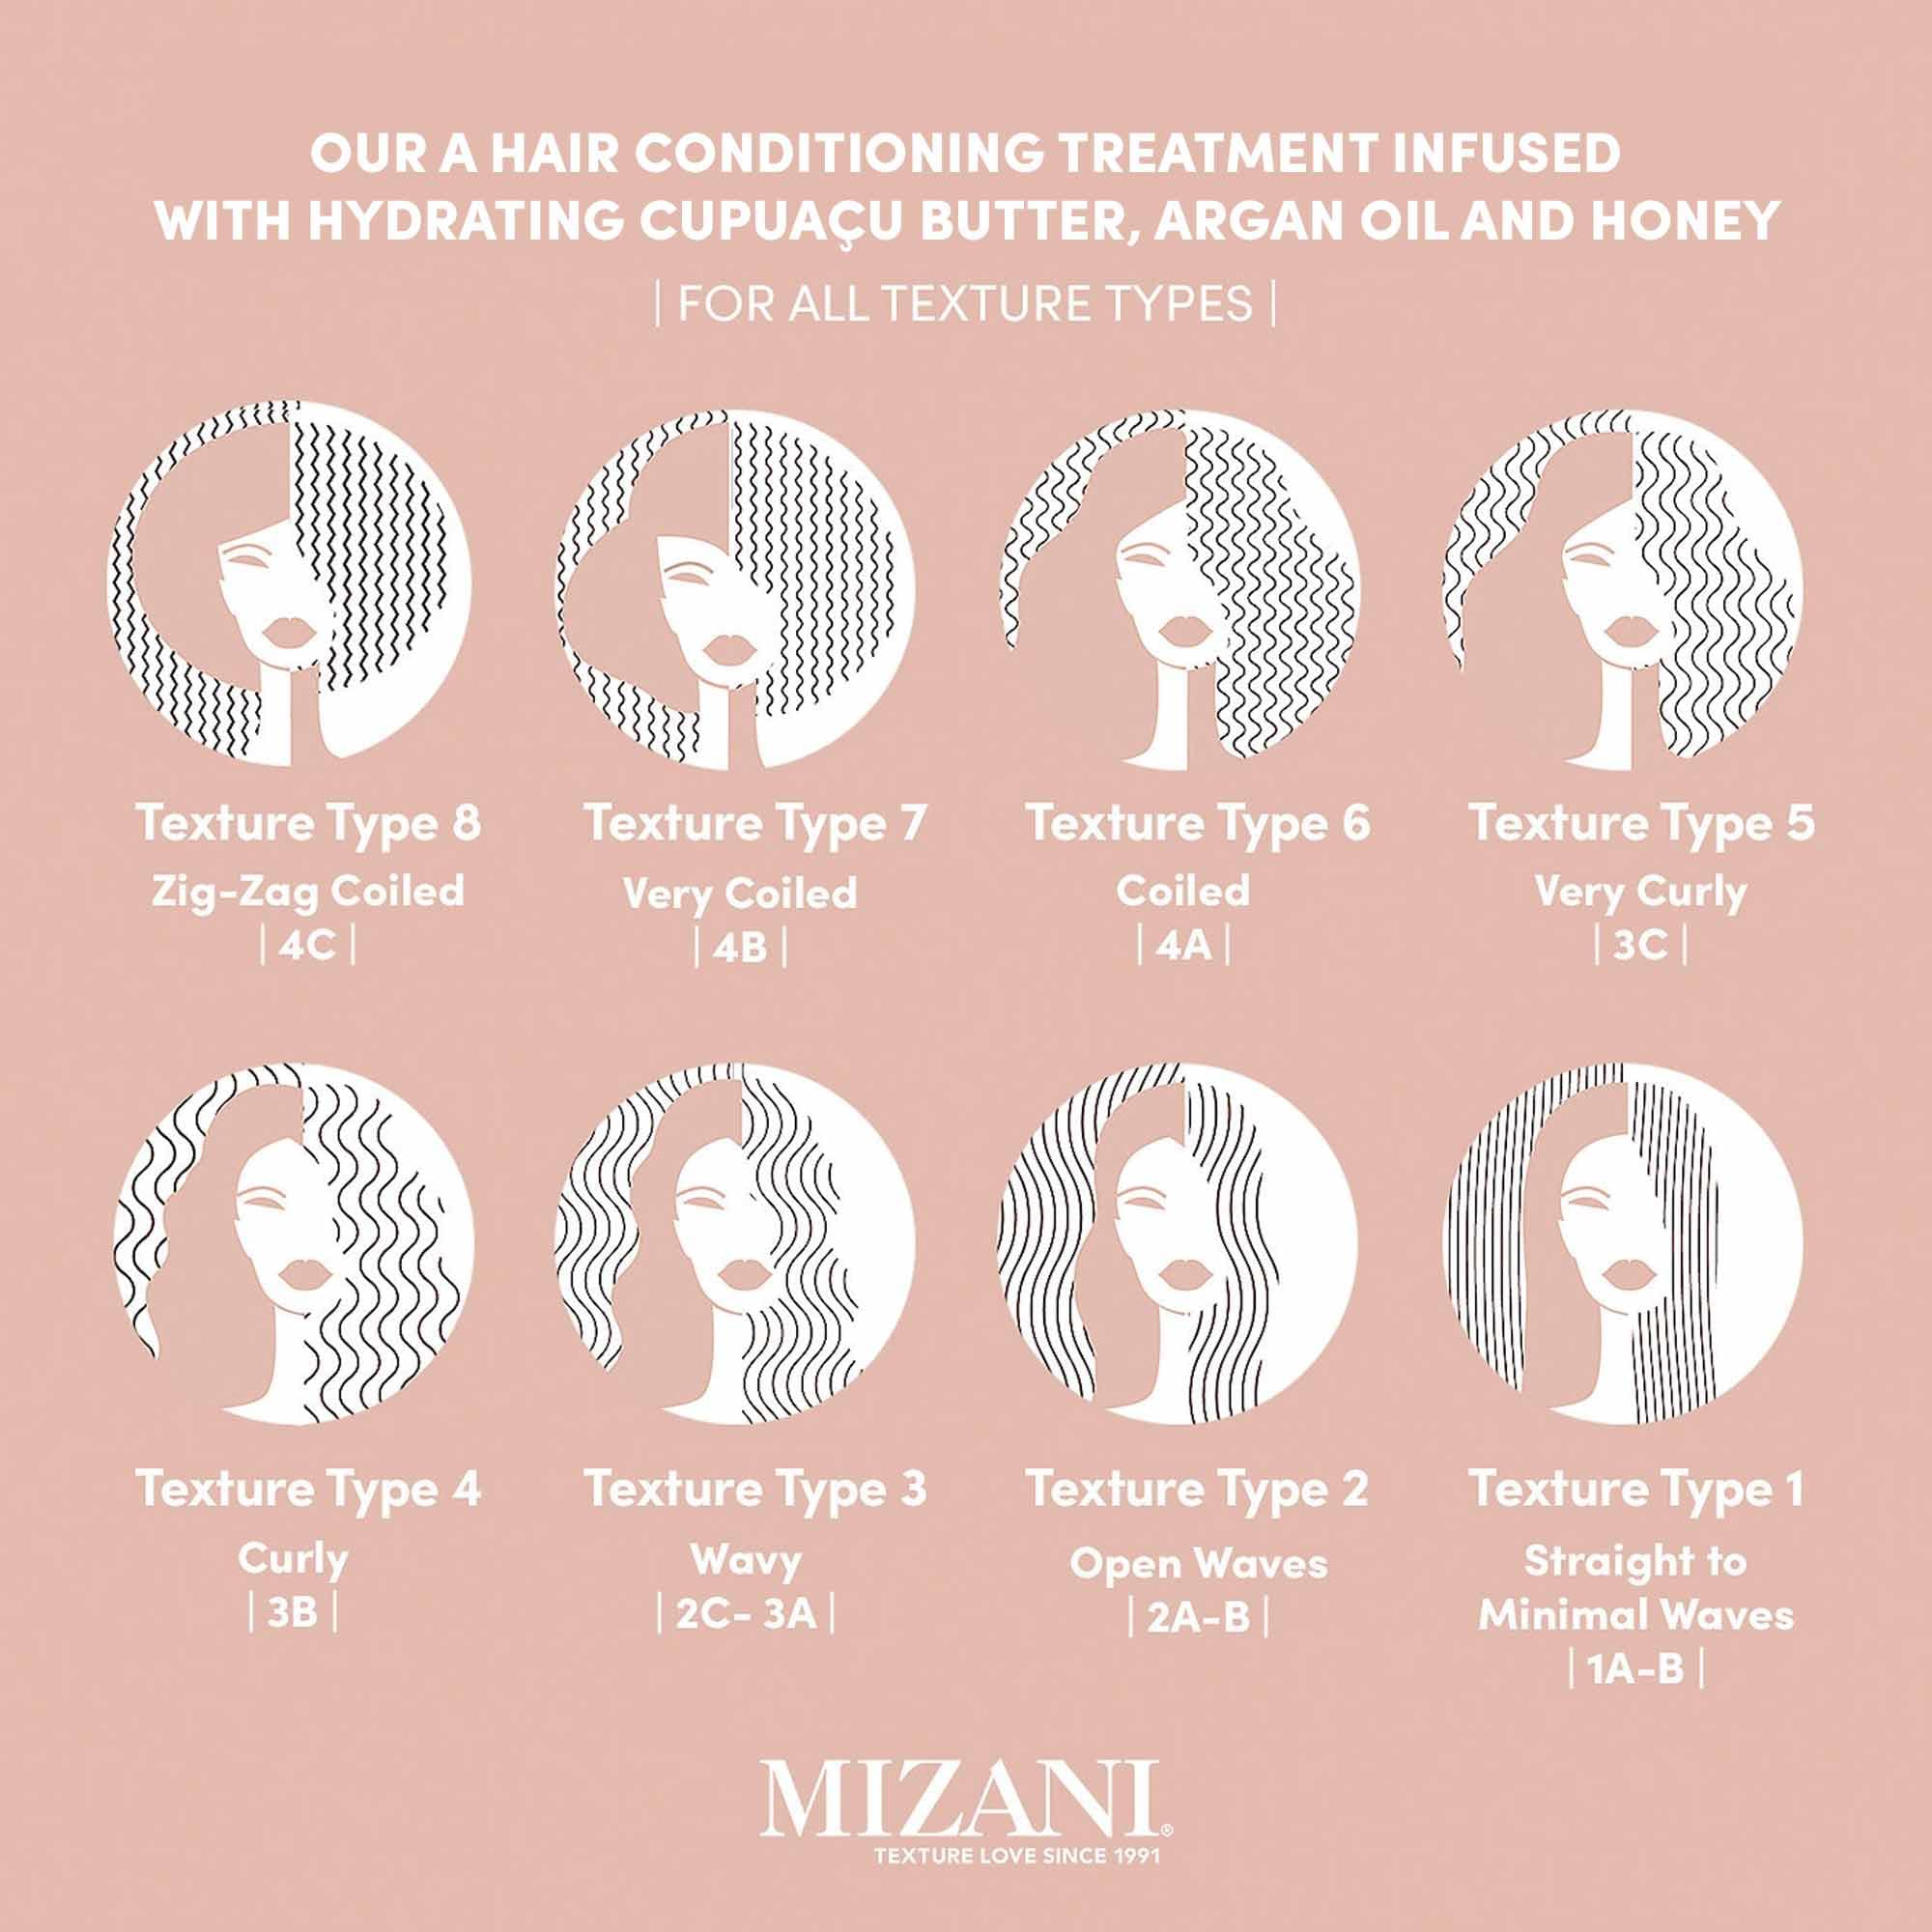 Mizani Moisture Fusion Intense Moisturizing Mask | Restores Hydration in Dry Curls & Coils | Moisturizies without Buildup | with Argan Oil and Honey | for Dry Hair | 16.9 Fl Oz